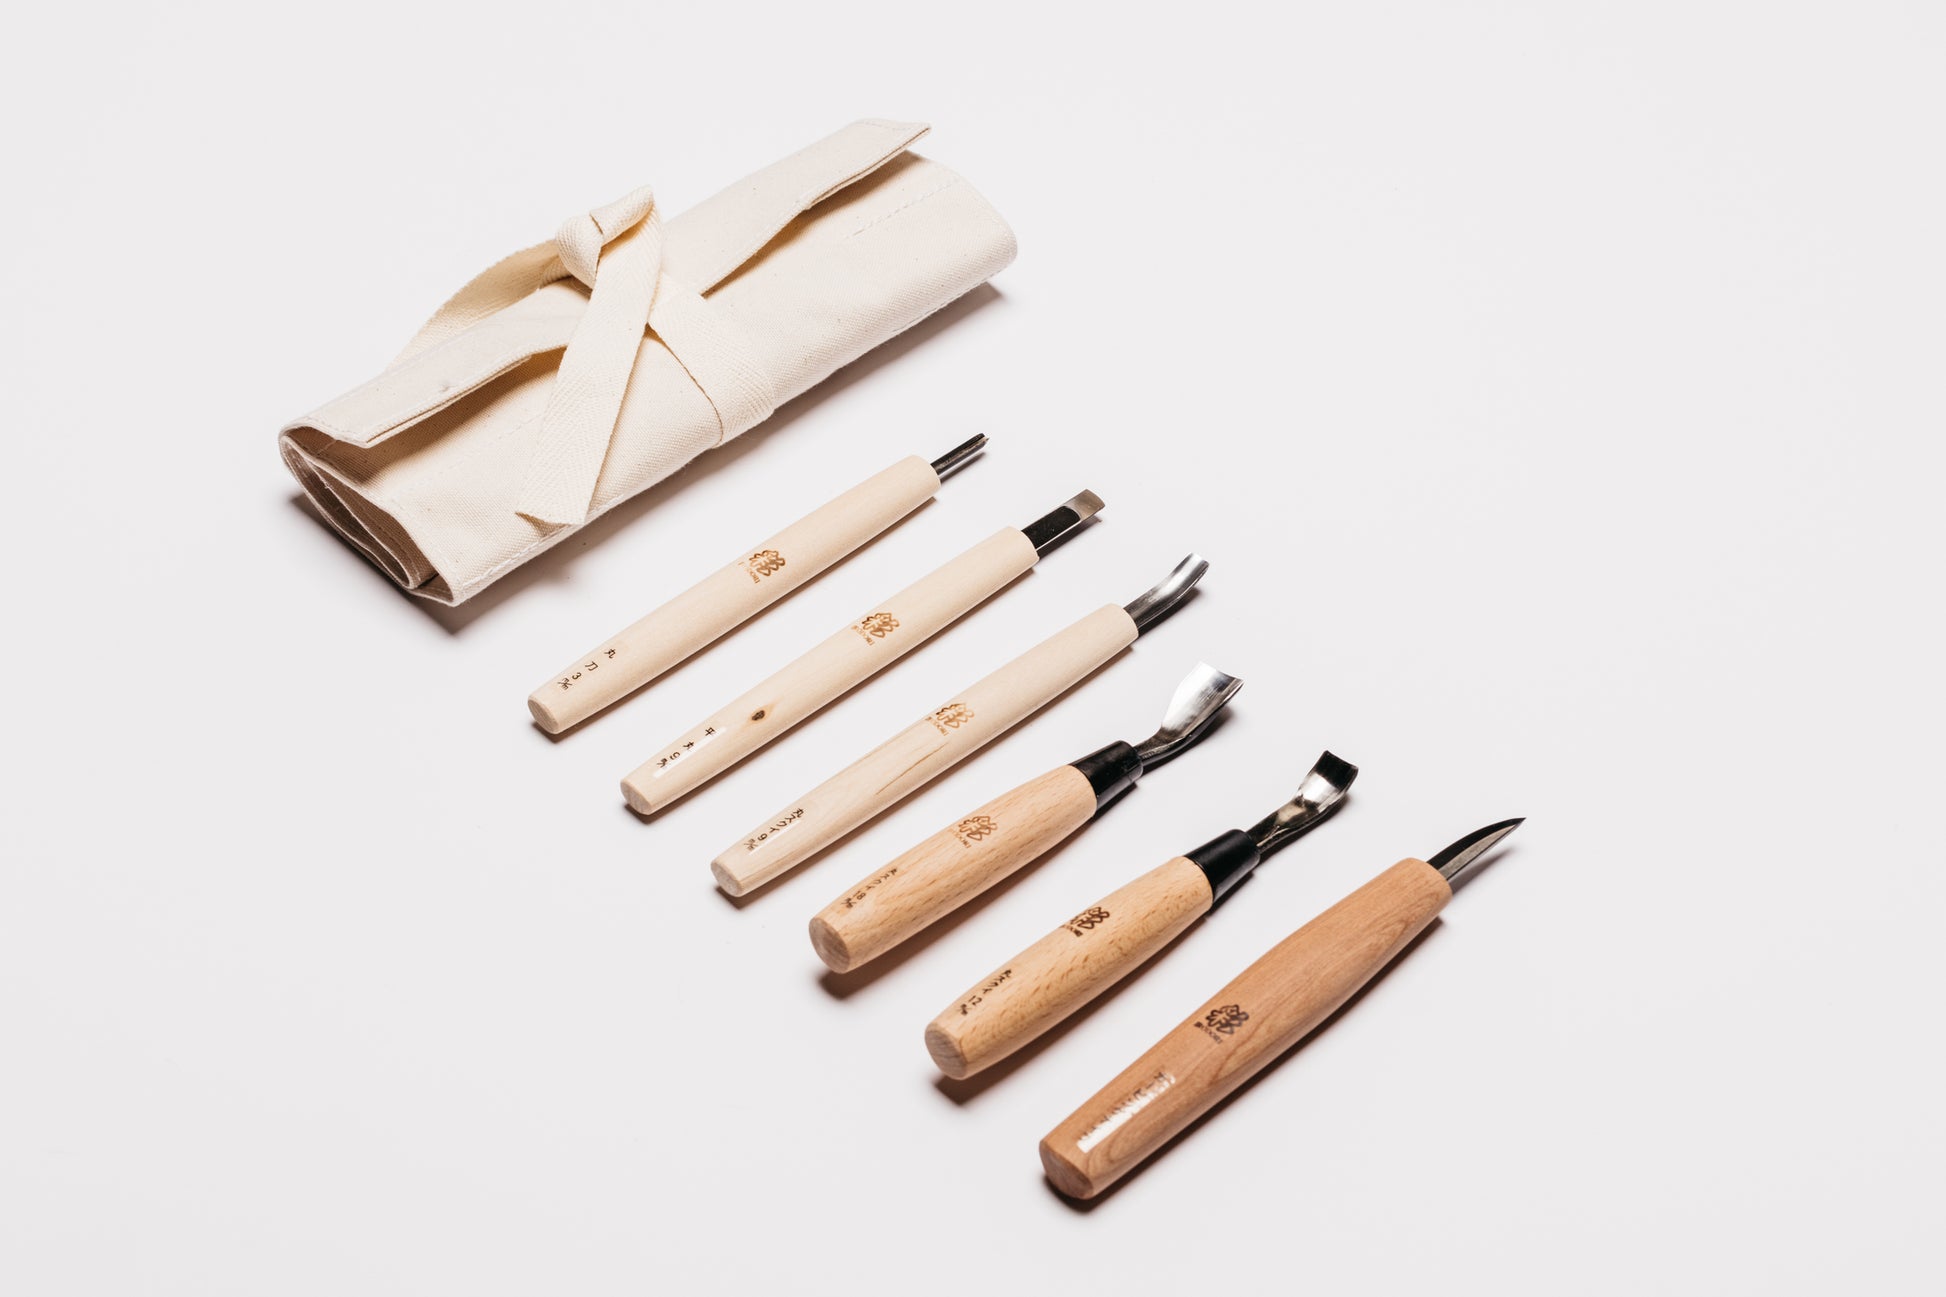 Japanese carving tool sets